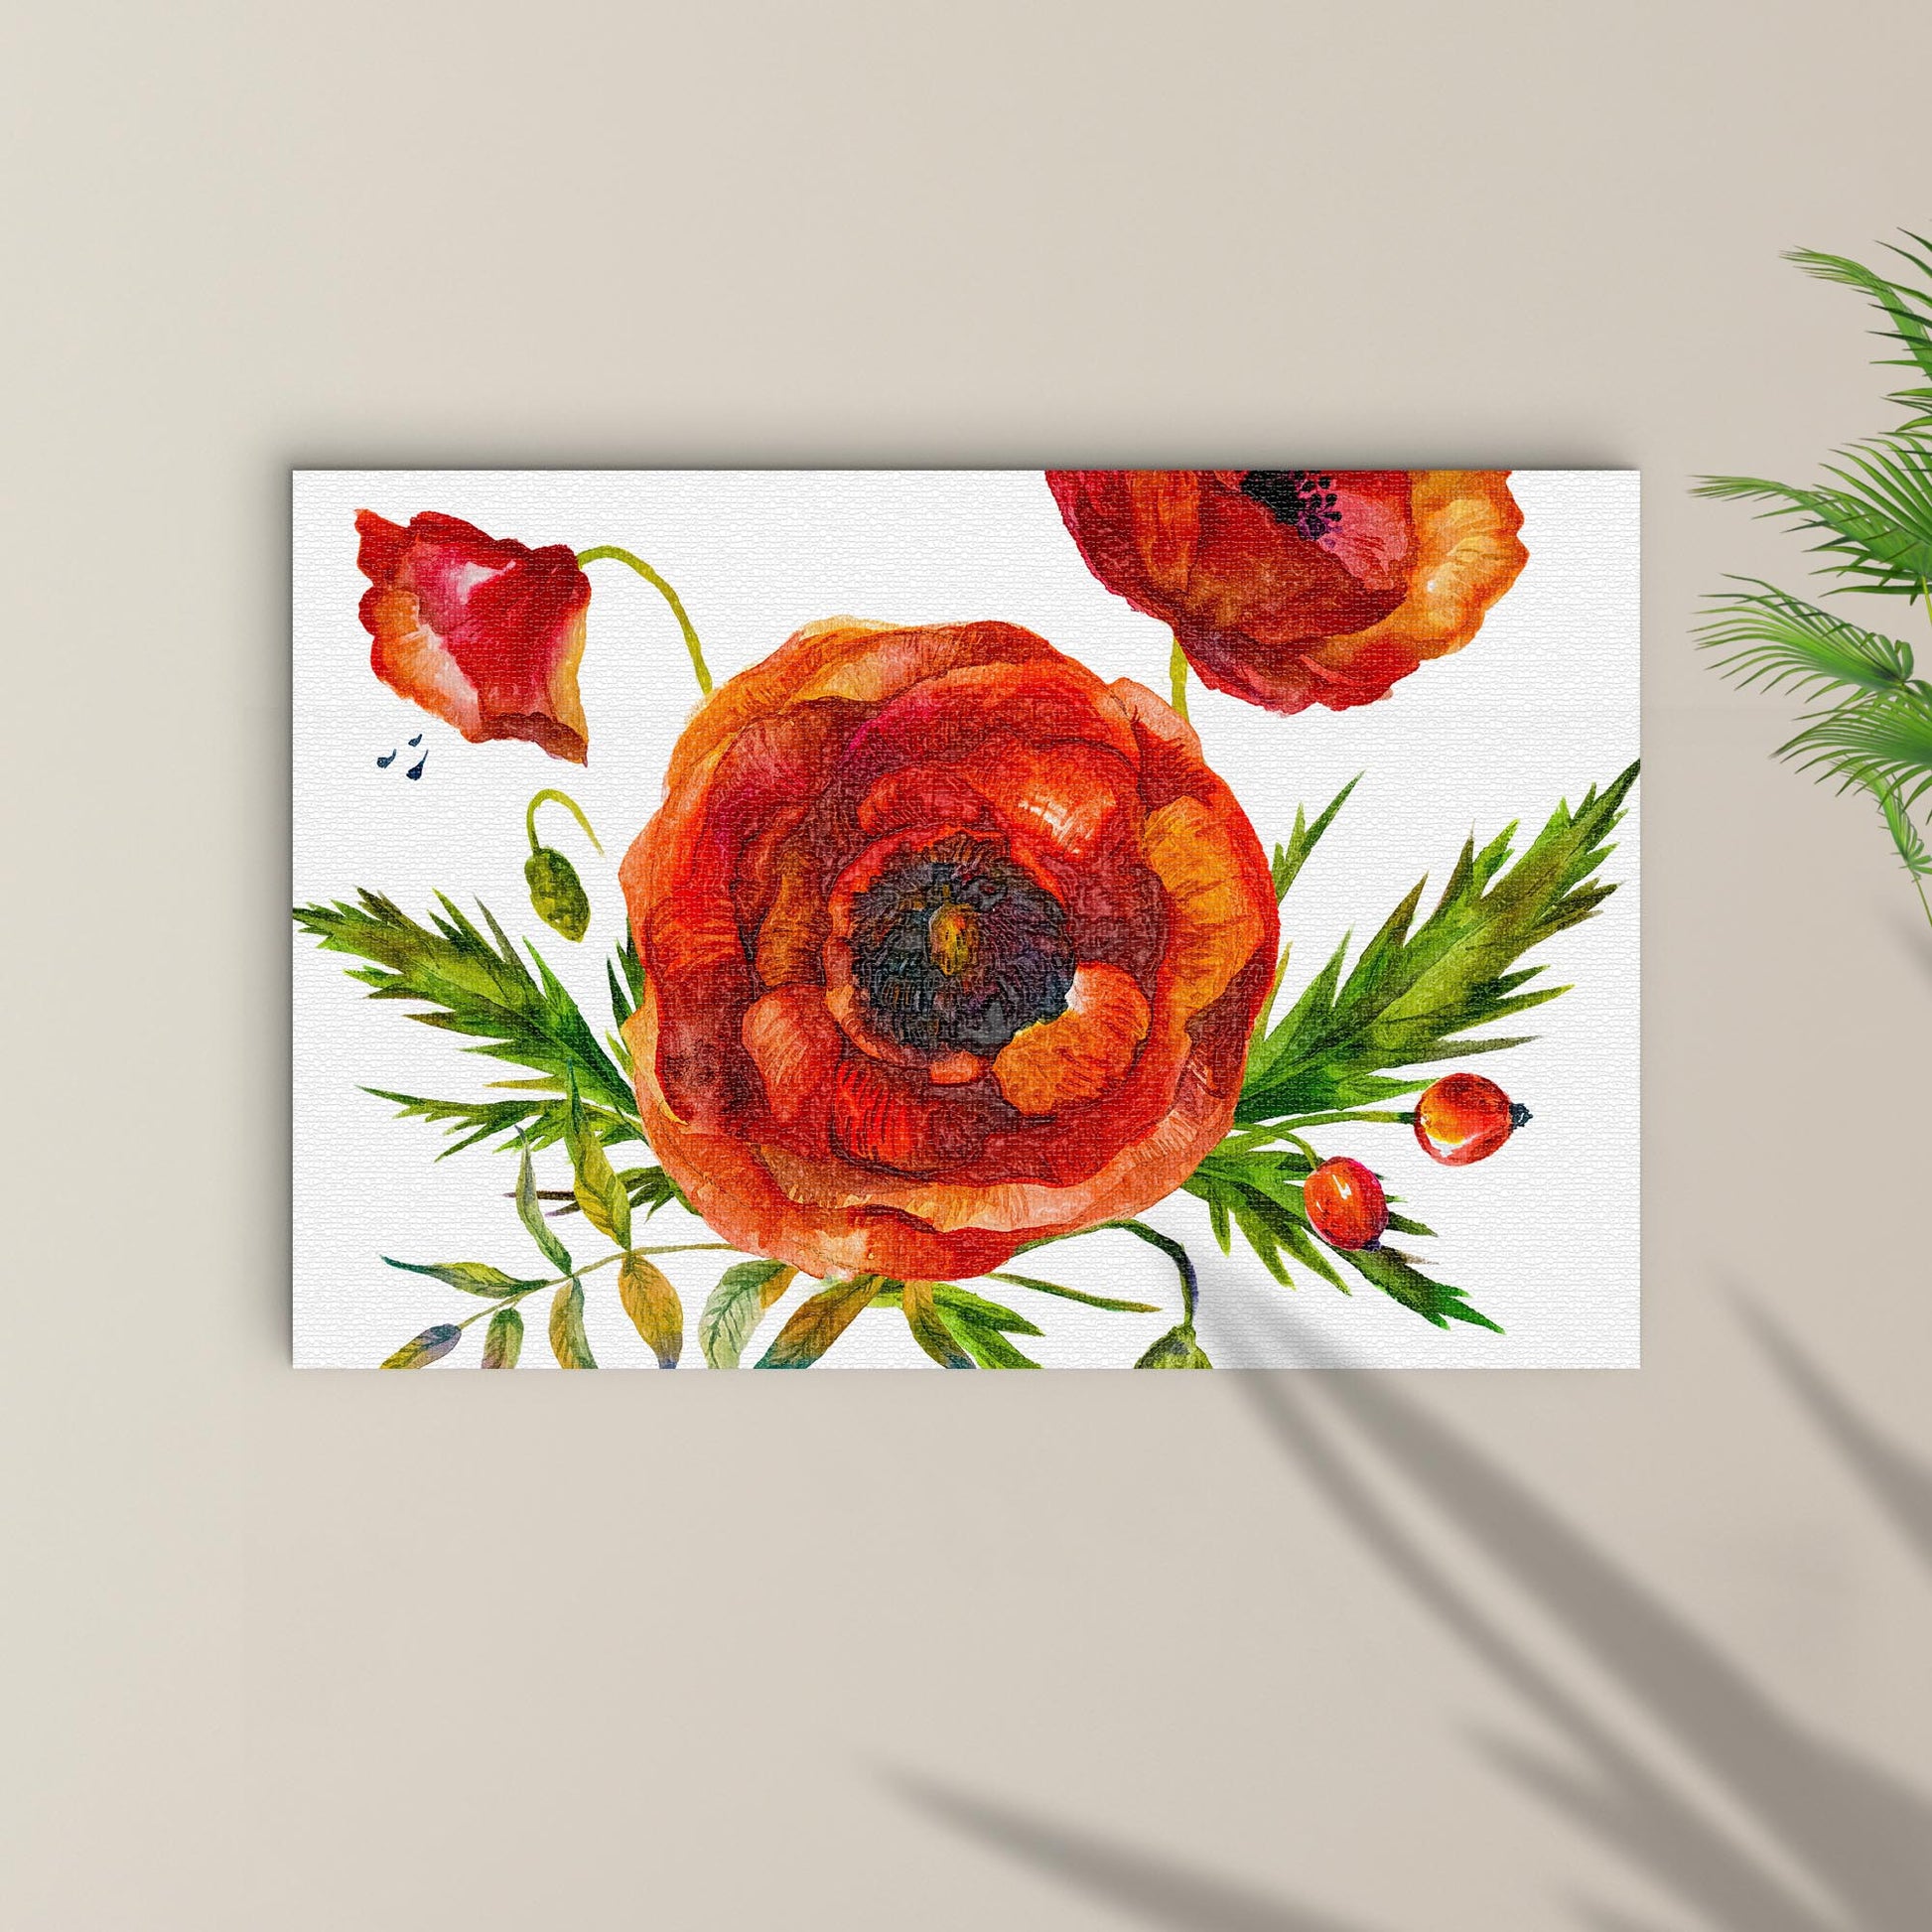 Poppies Melody Flower Canvas Wall Art - Image by Tailored Canvases